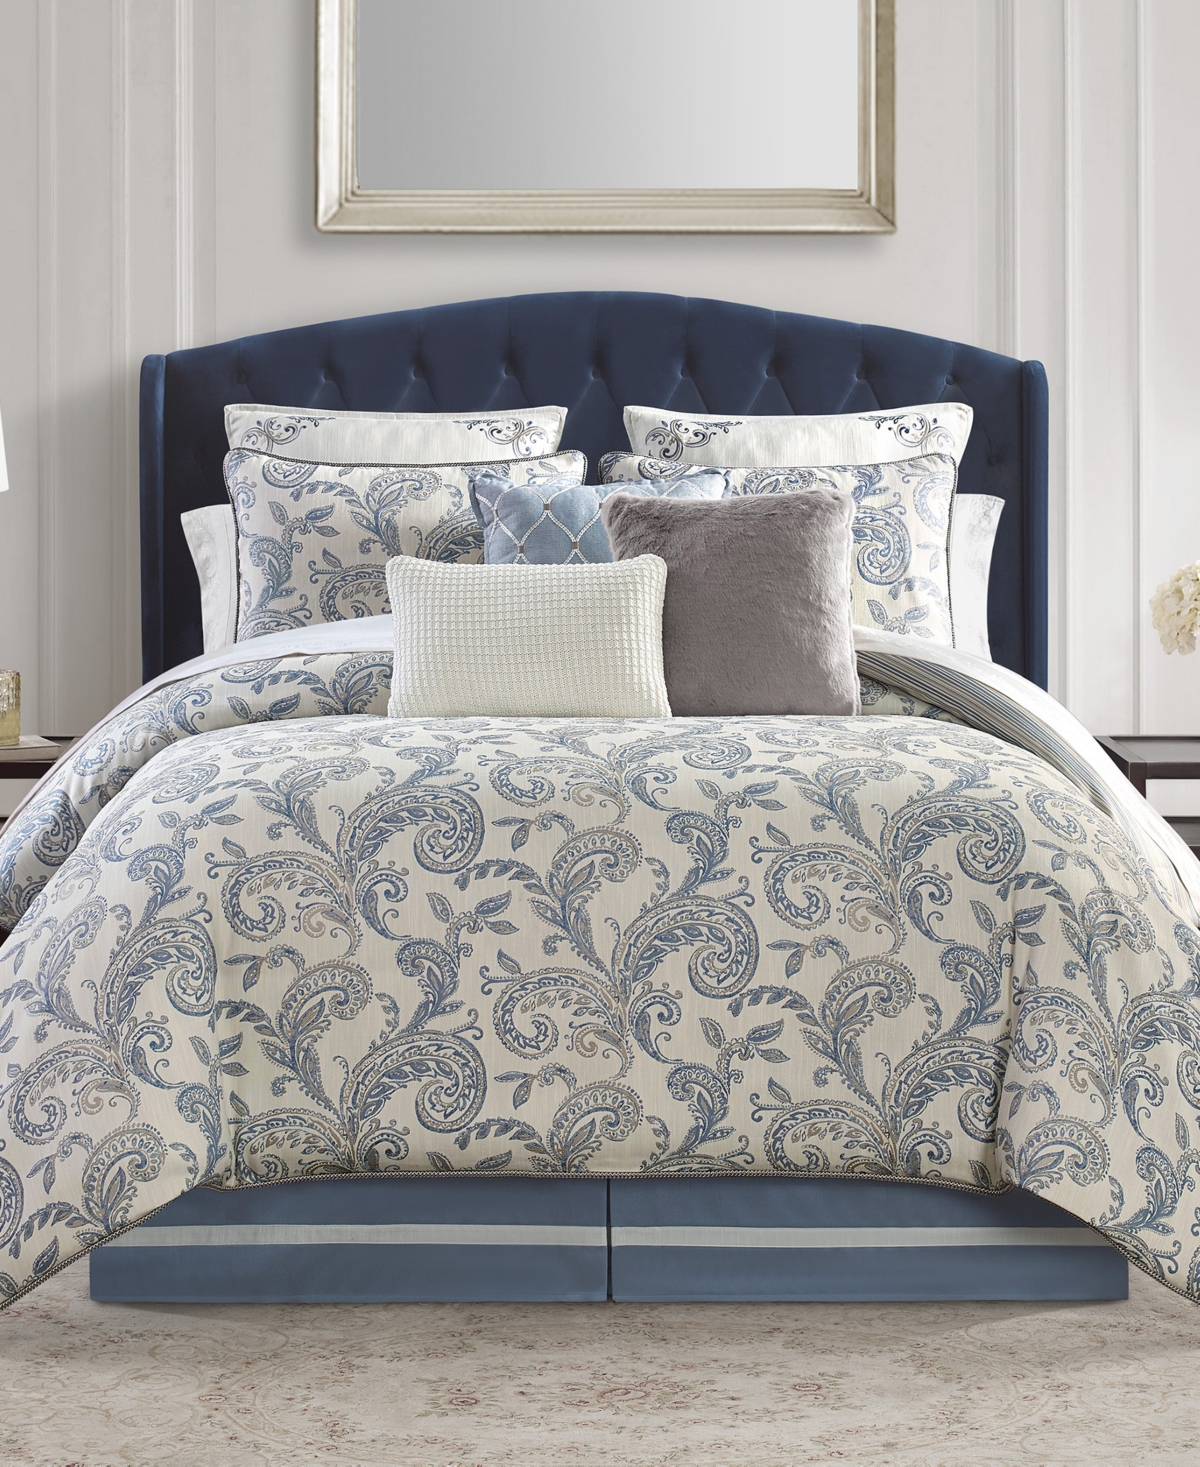 Waterford Florence 6 Piece Comforter Set, California King In Chambray Blue